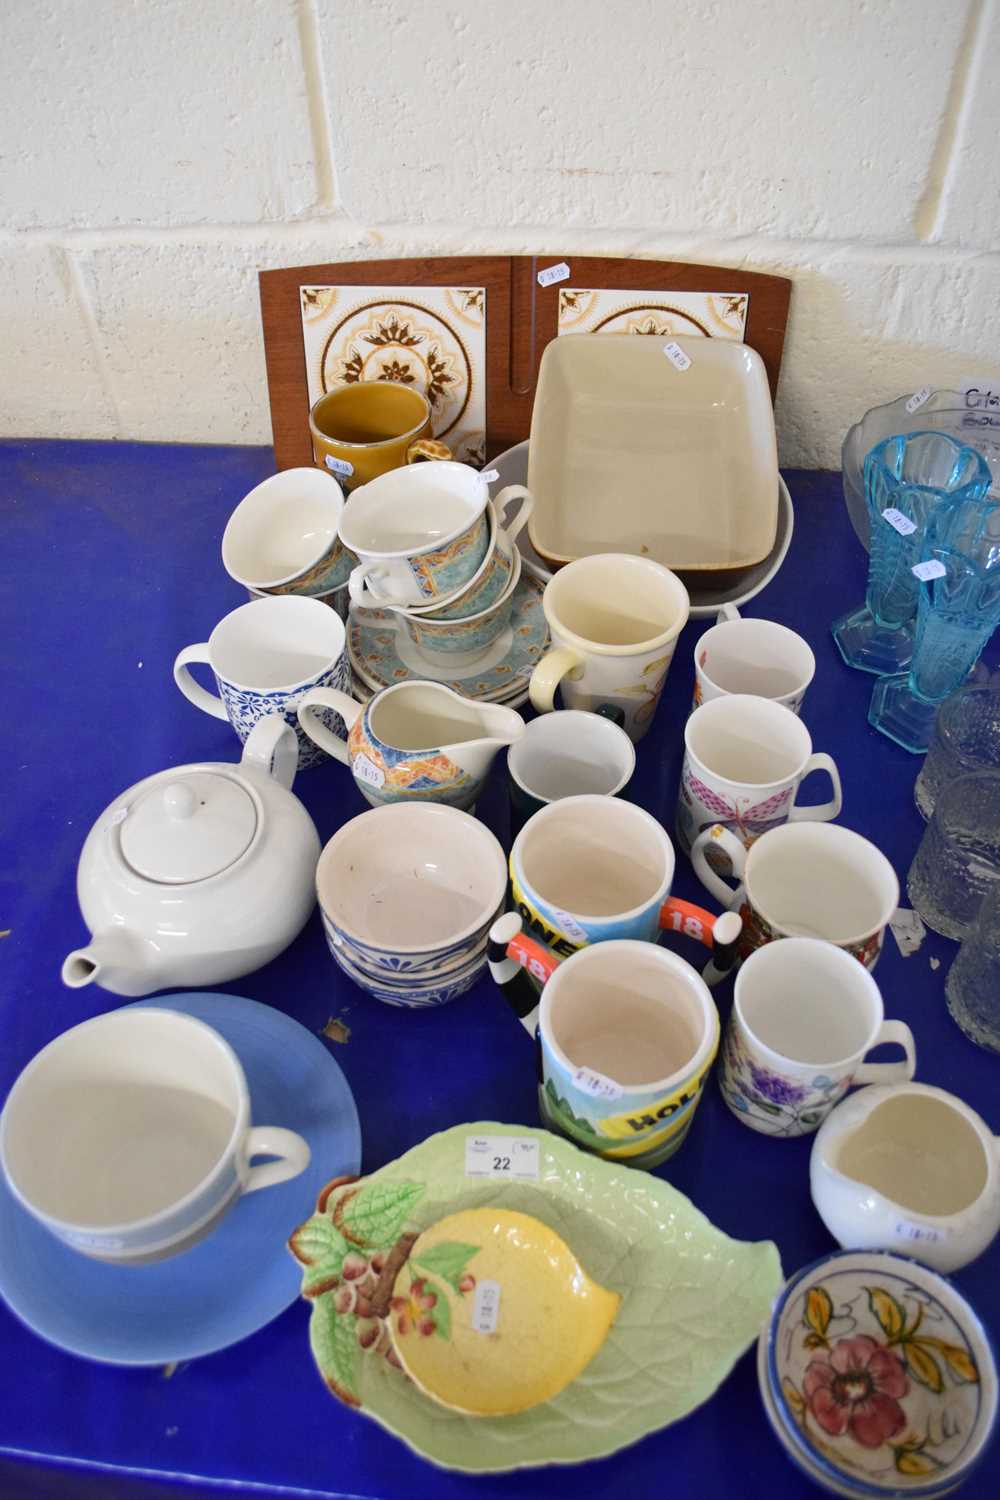 VARIOUS CERAMICS TO INCLUDE CARLTON WARE LEAF FORMED DISHES, VARIOUS MUGS, KITCHEN WARES, TILED